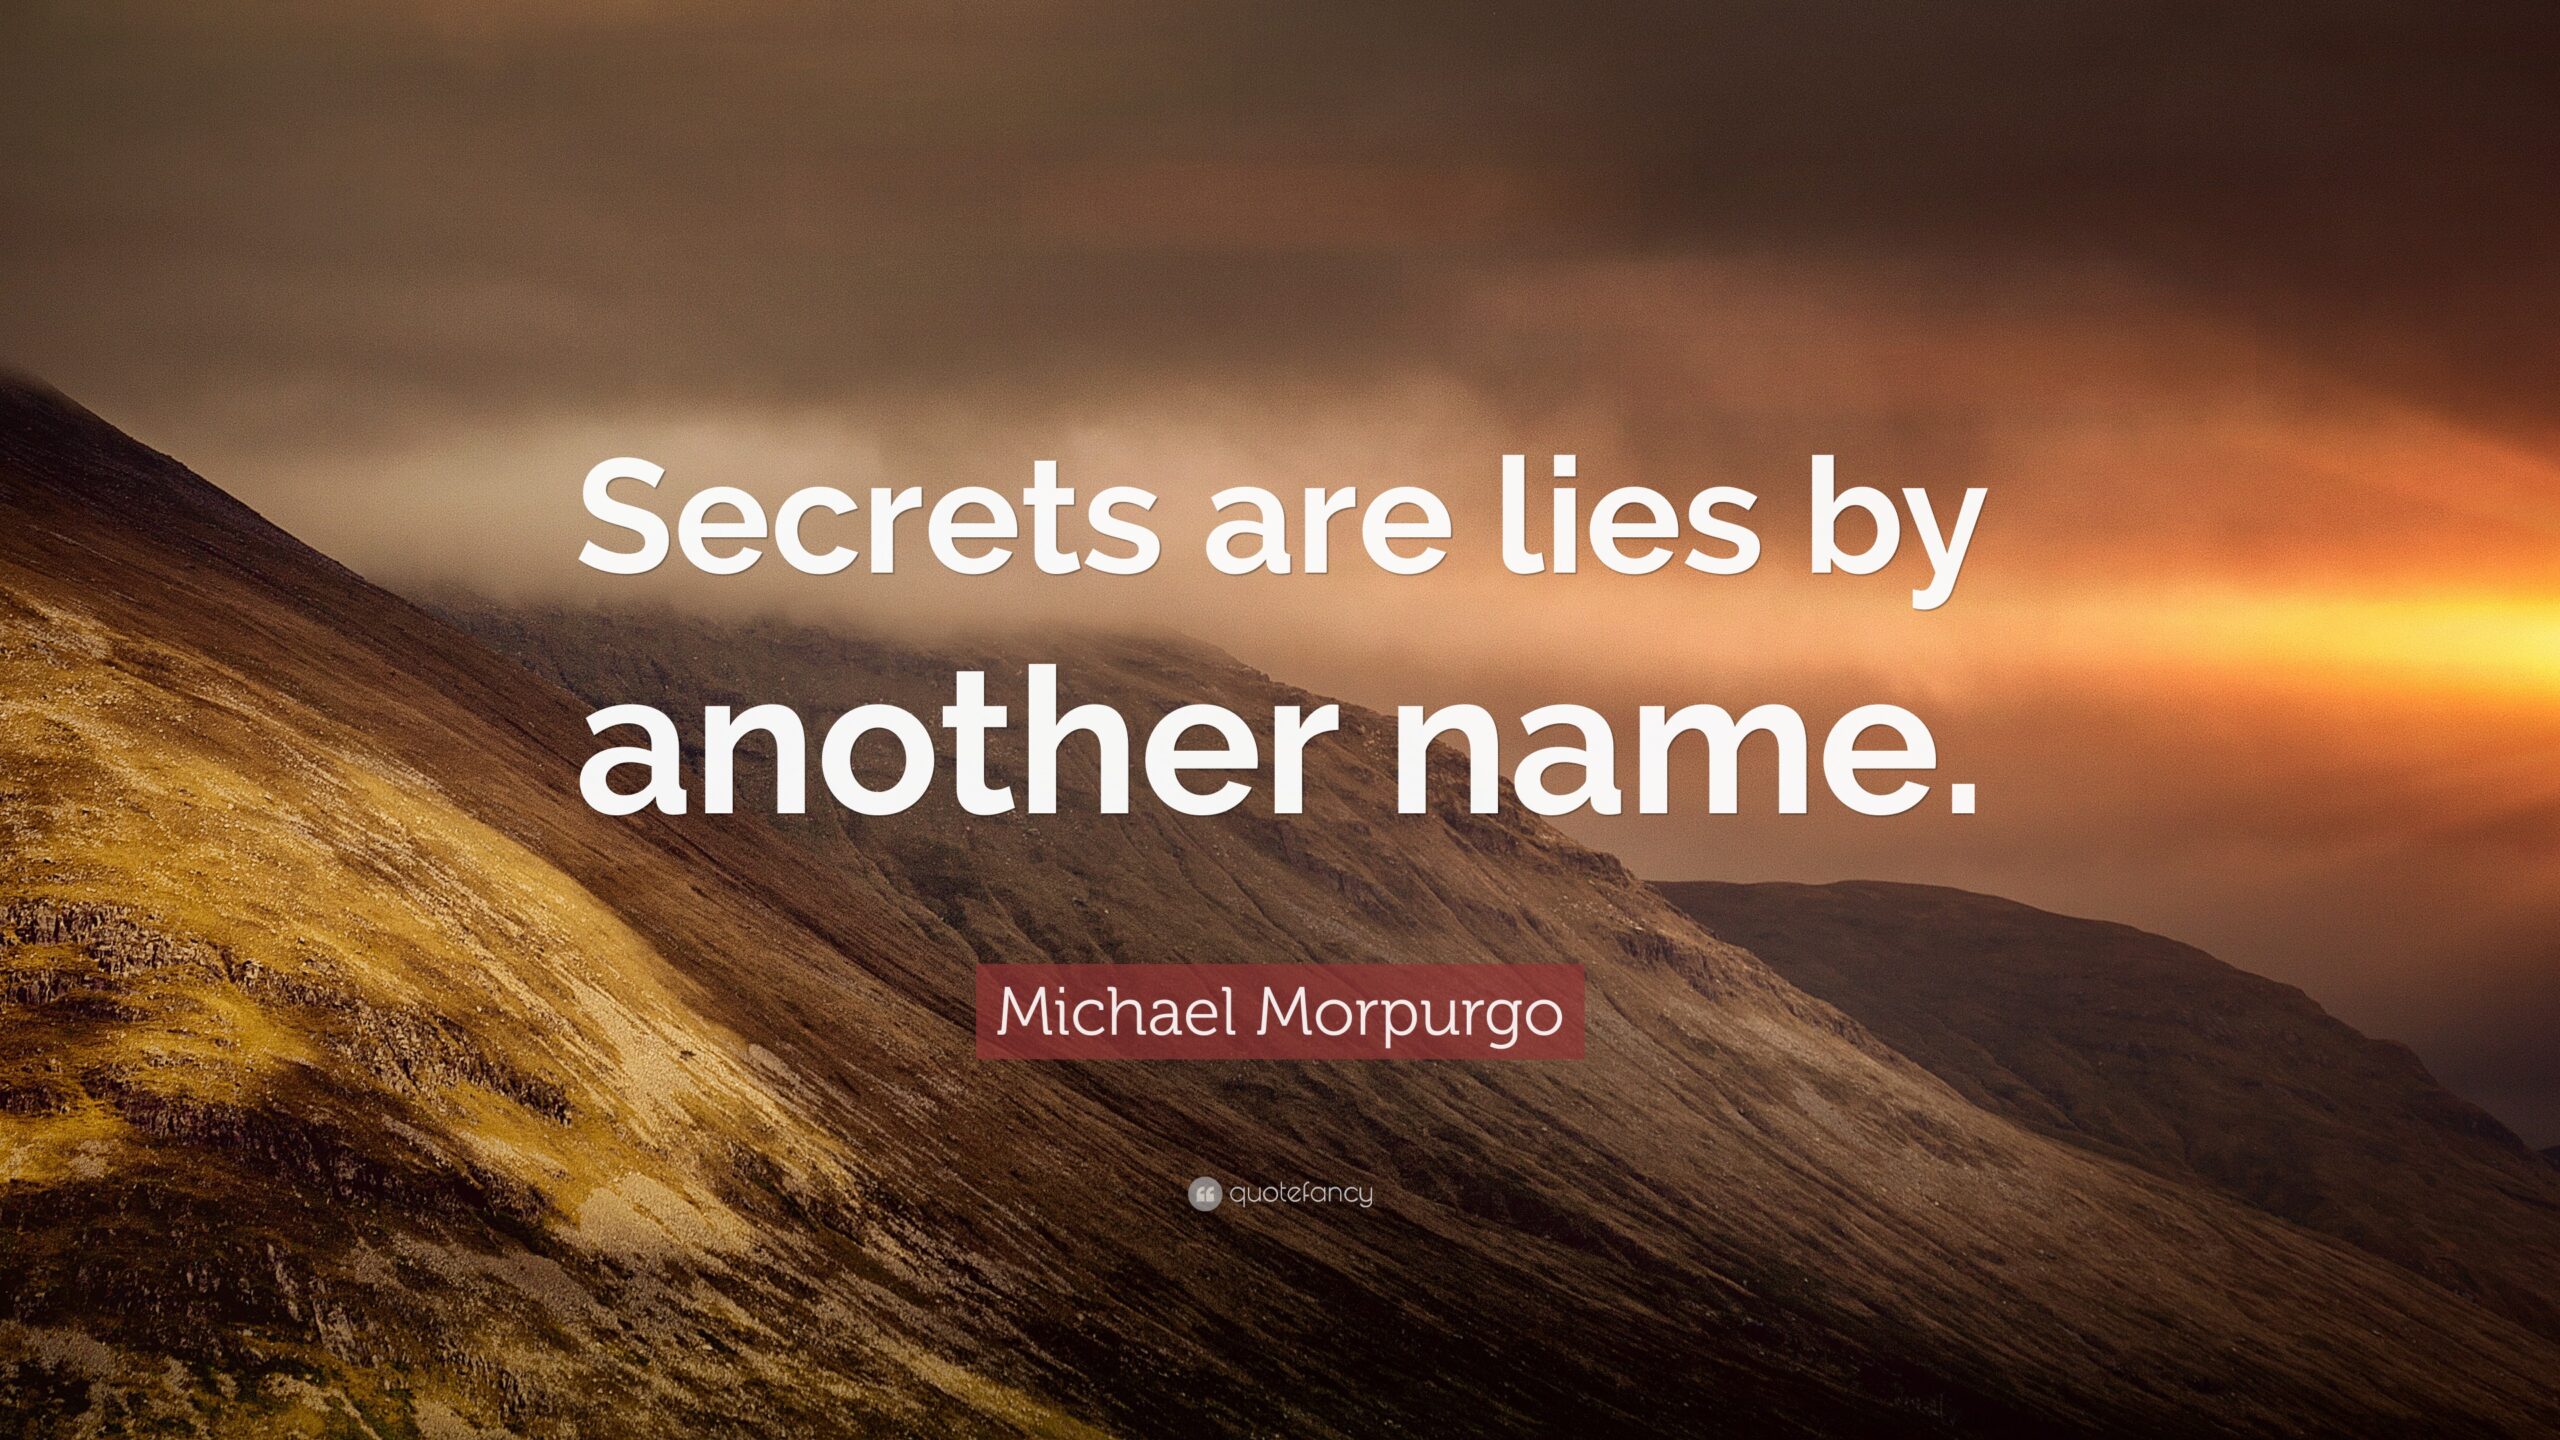 Quotes About Secrets And Lies Secrets Are Lies By Another Name